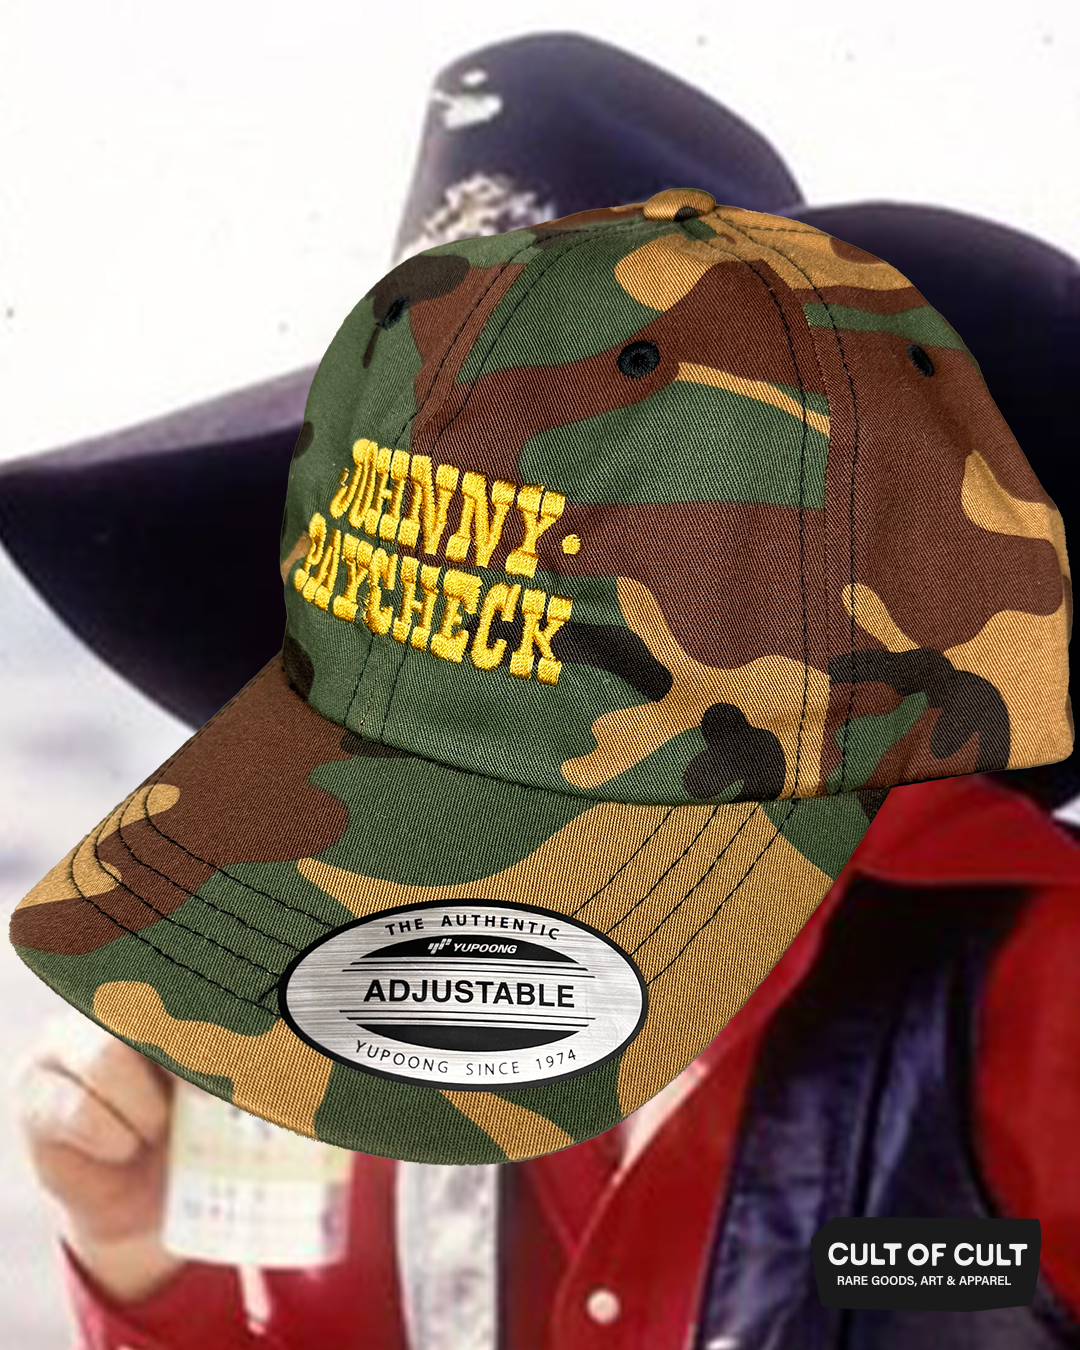 a front and side view of the camo Johnny Paycheck hat